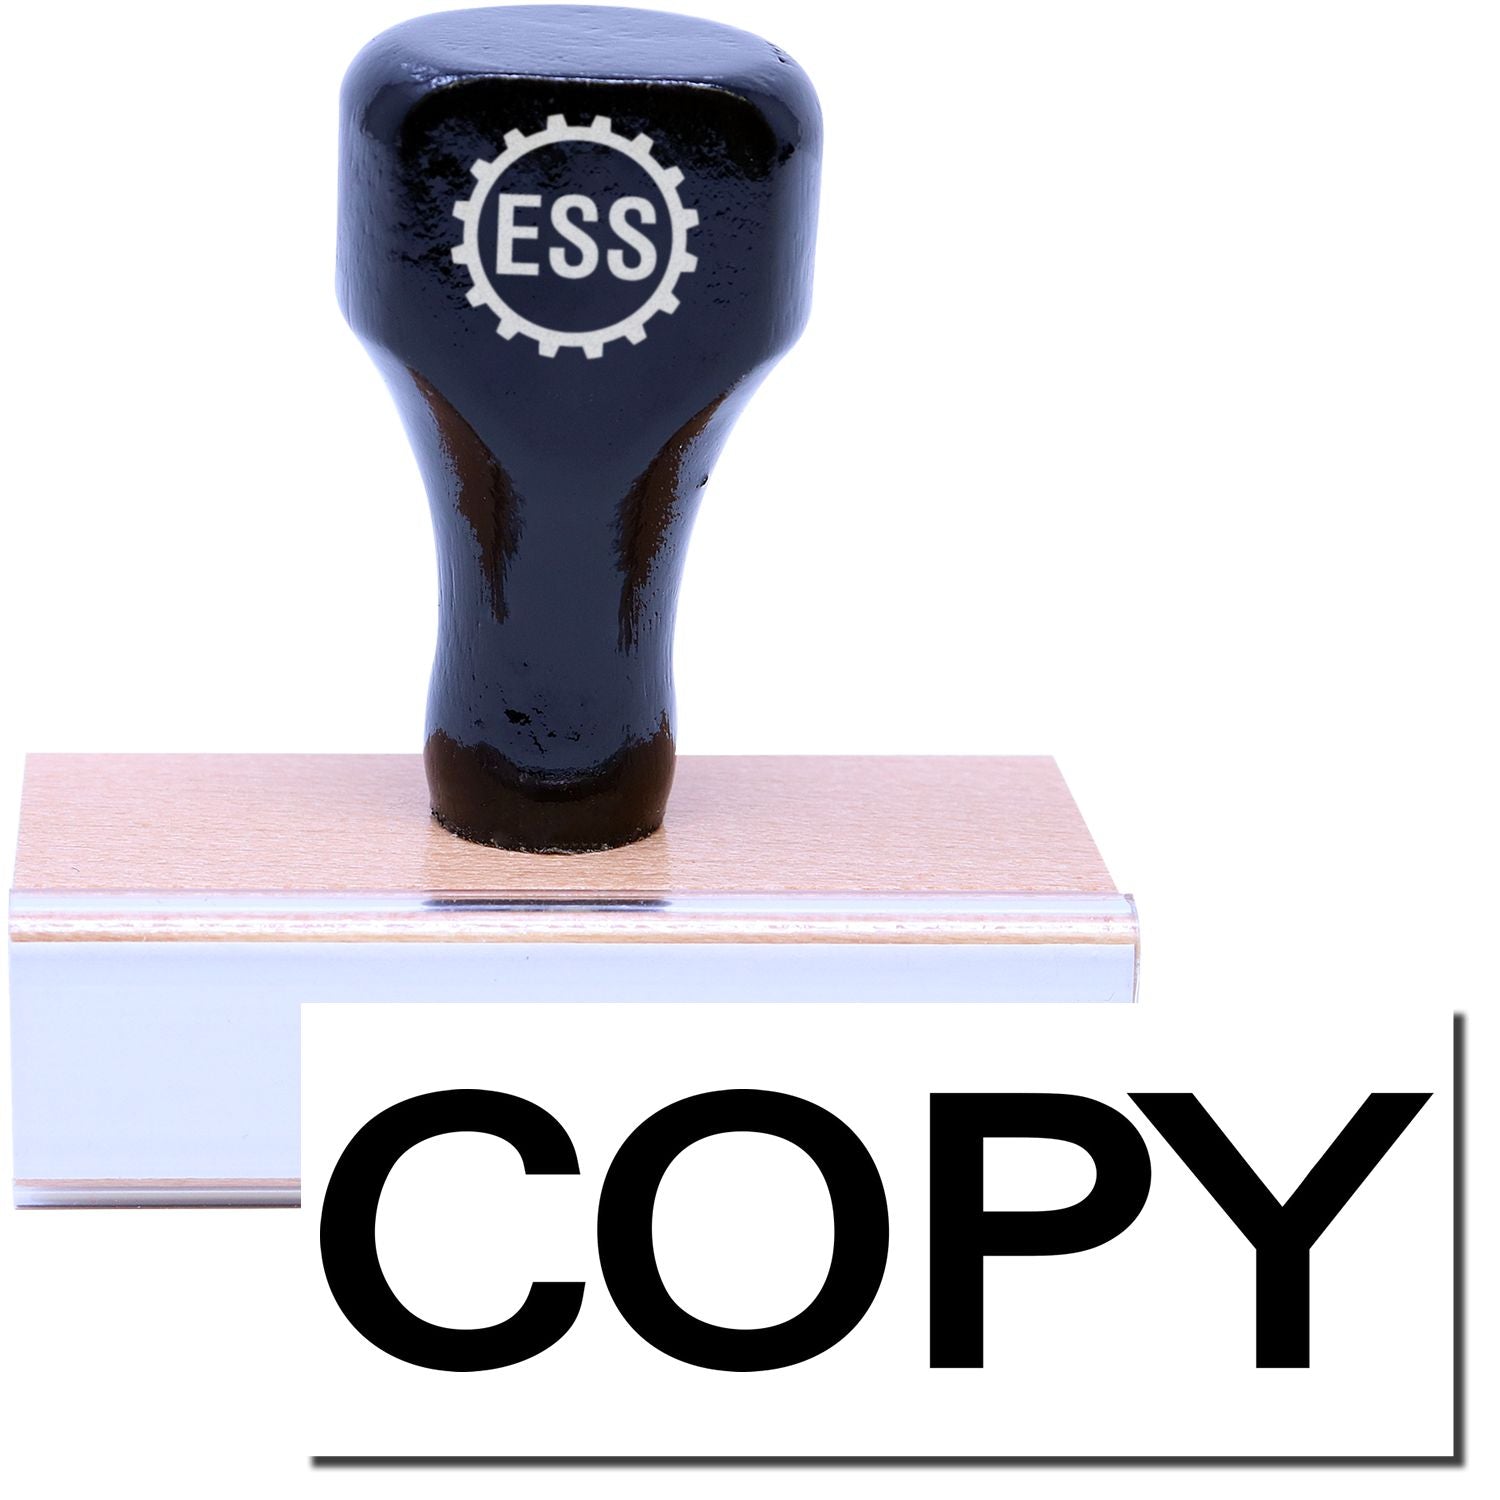 A stock office rubber stamp with a stamped image showing how the text "COPY" in a large bold font is displayed after stamping.